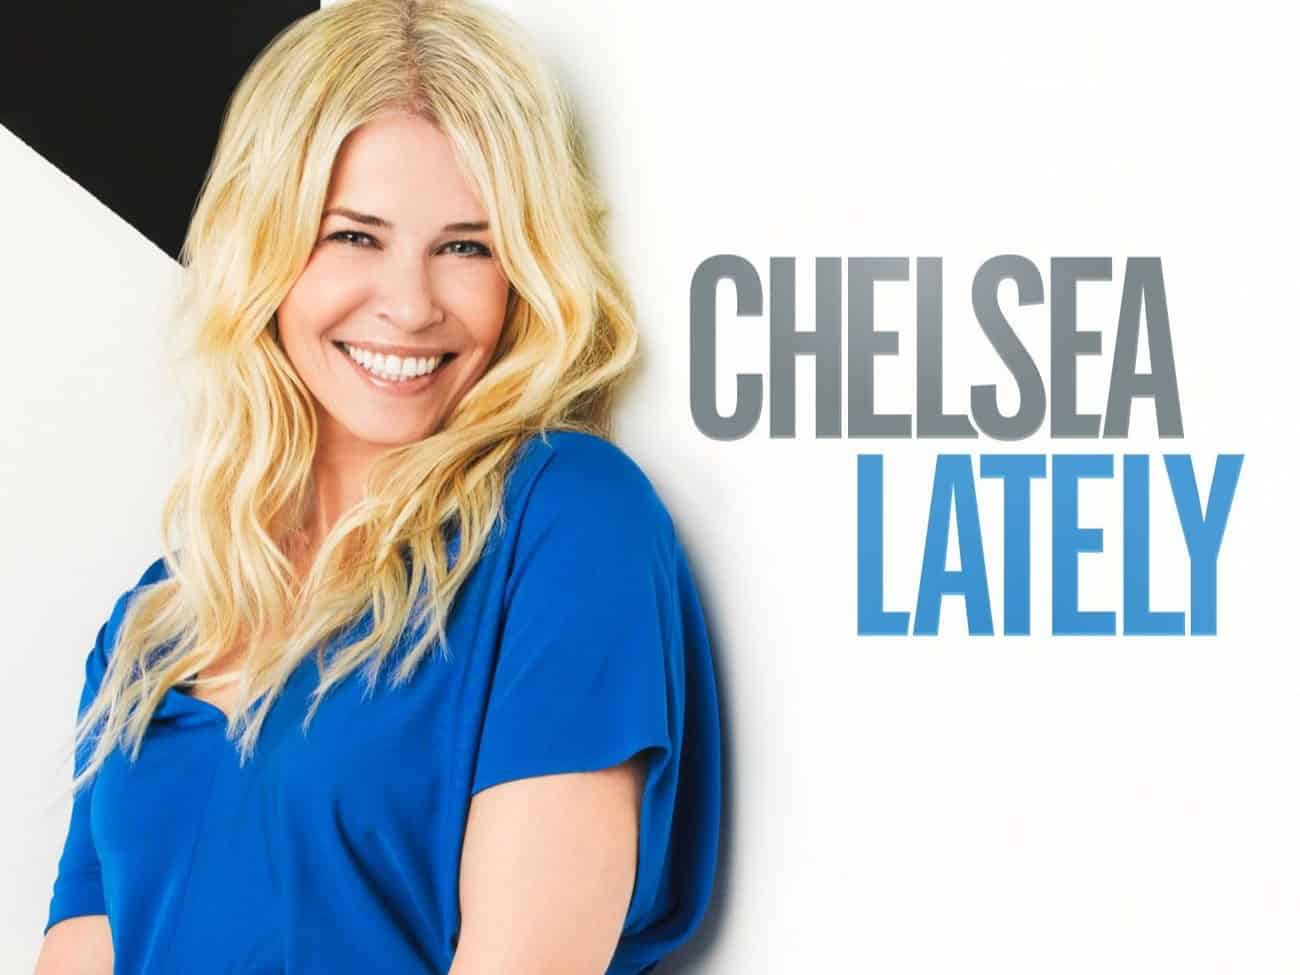 In July 2007, Chelsea Handler started headlining her late-night comedy series "Chelsea Lately" on E!